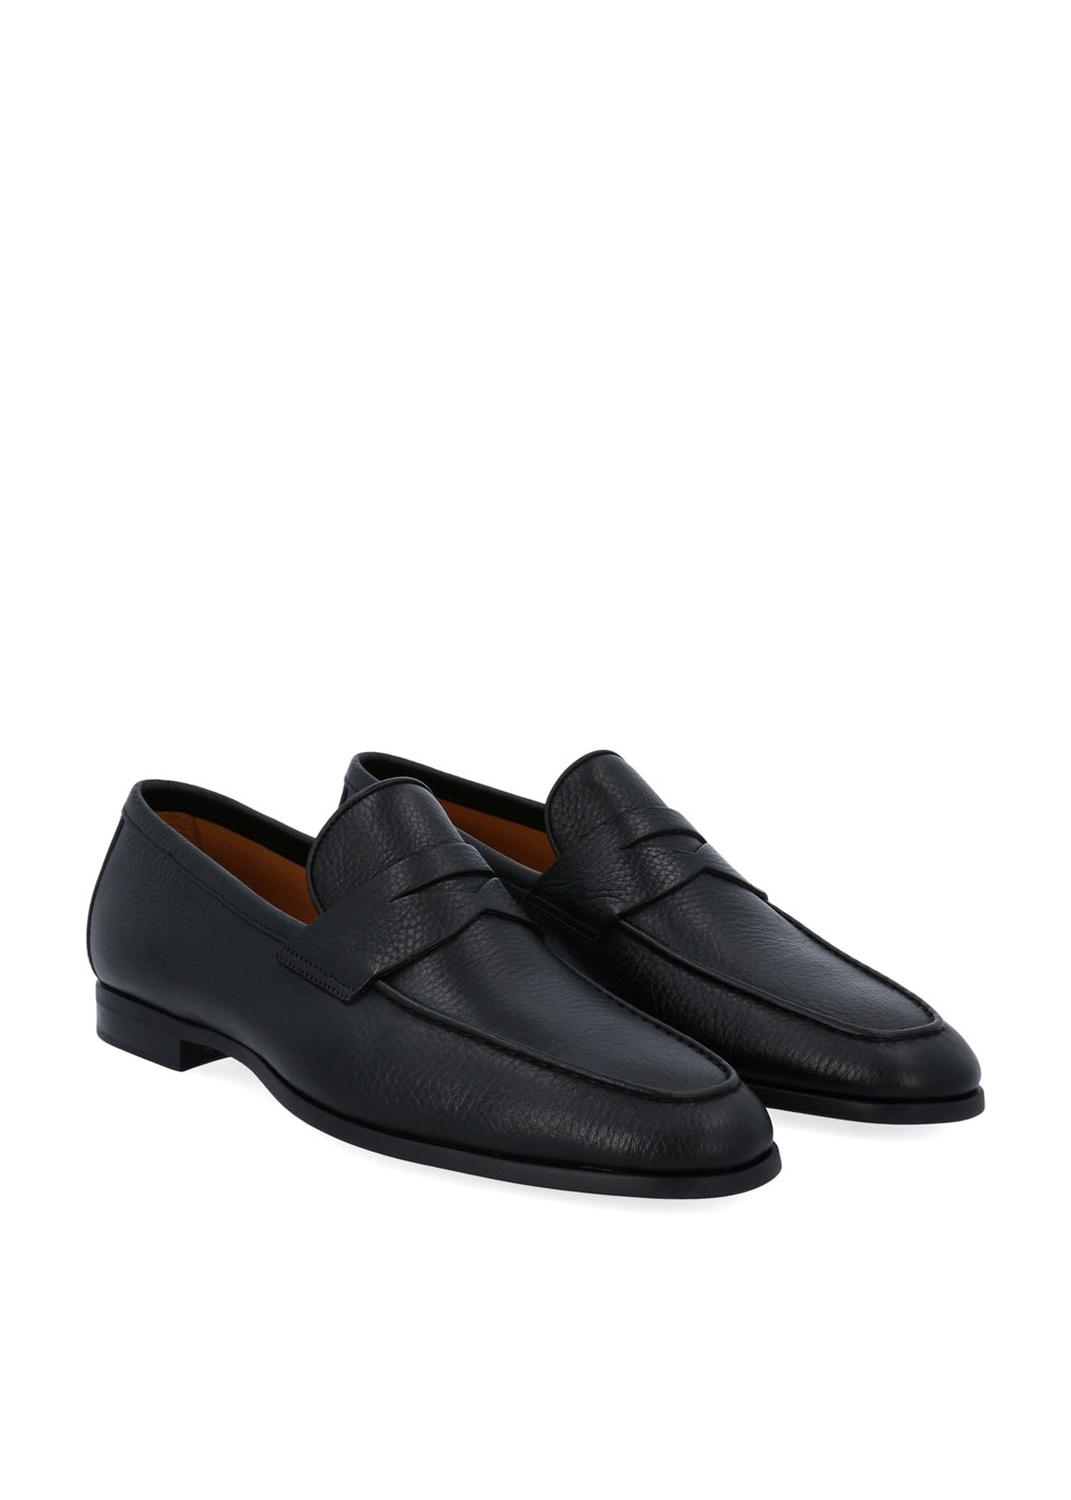 Magnanni loafers Diezma II MGN-23802